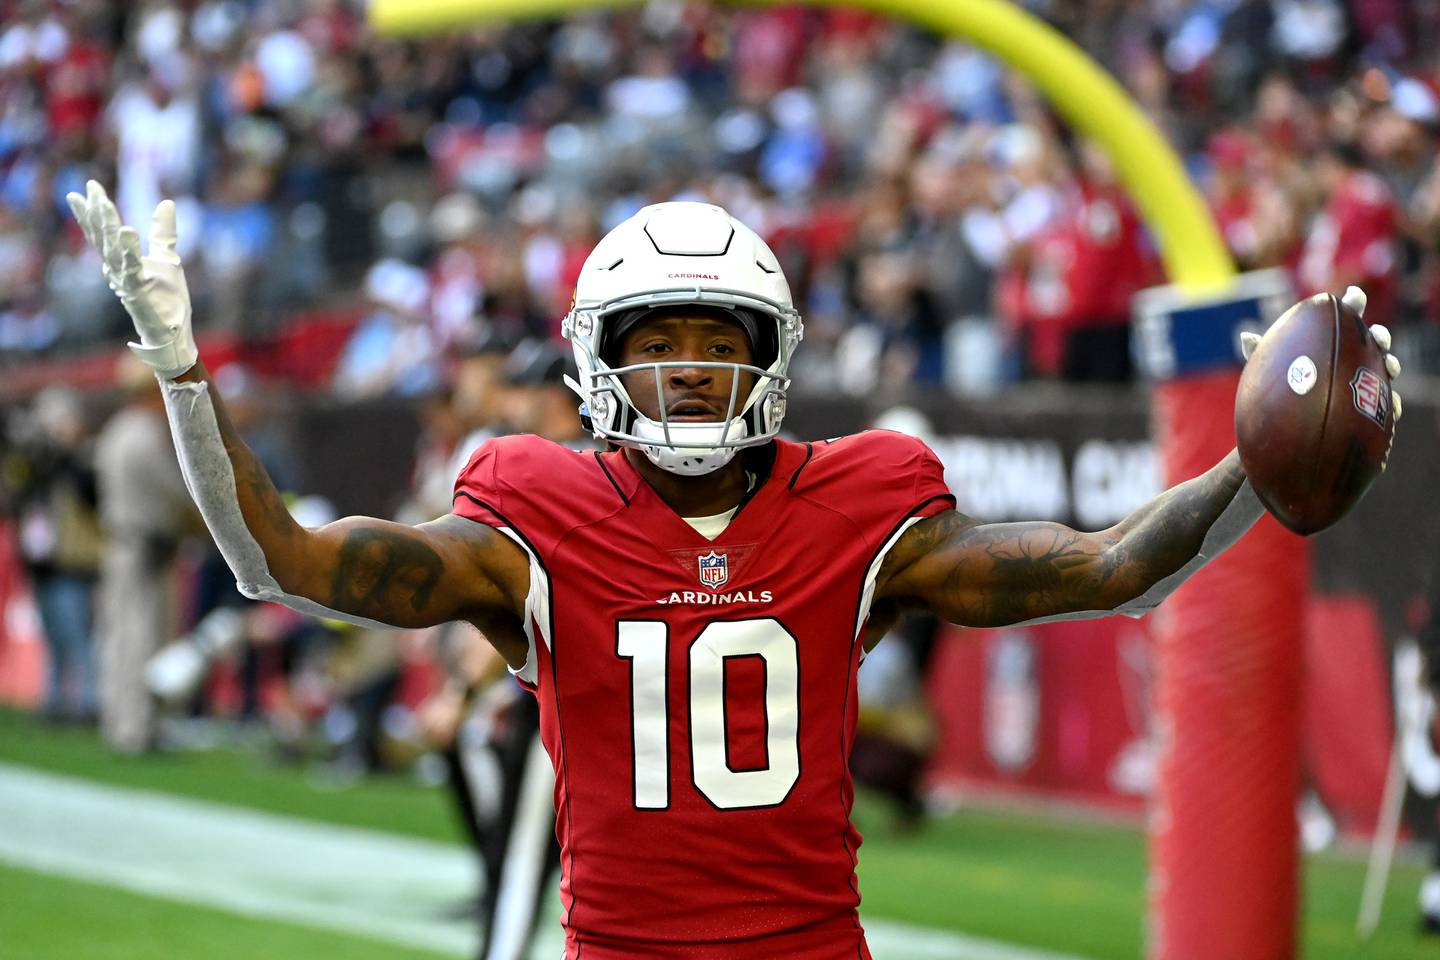 GLENDALE, ARIZONA - NOVEMBER 27: DeAndre Hopkins #10 of the Arizona Cardinals celebrates after scoring a touchdown in the first quarter of a game against the Los Angeles Chargers at State Farm Stadium on November 27, 2022 in Glendale, Arizona.